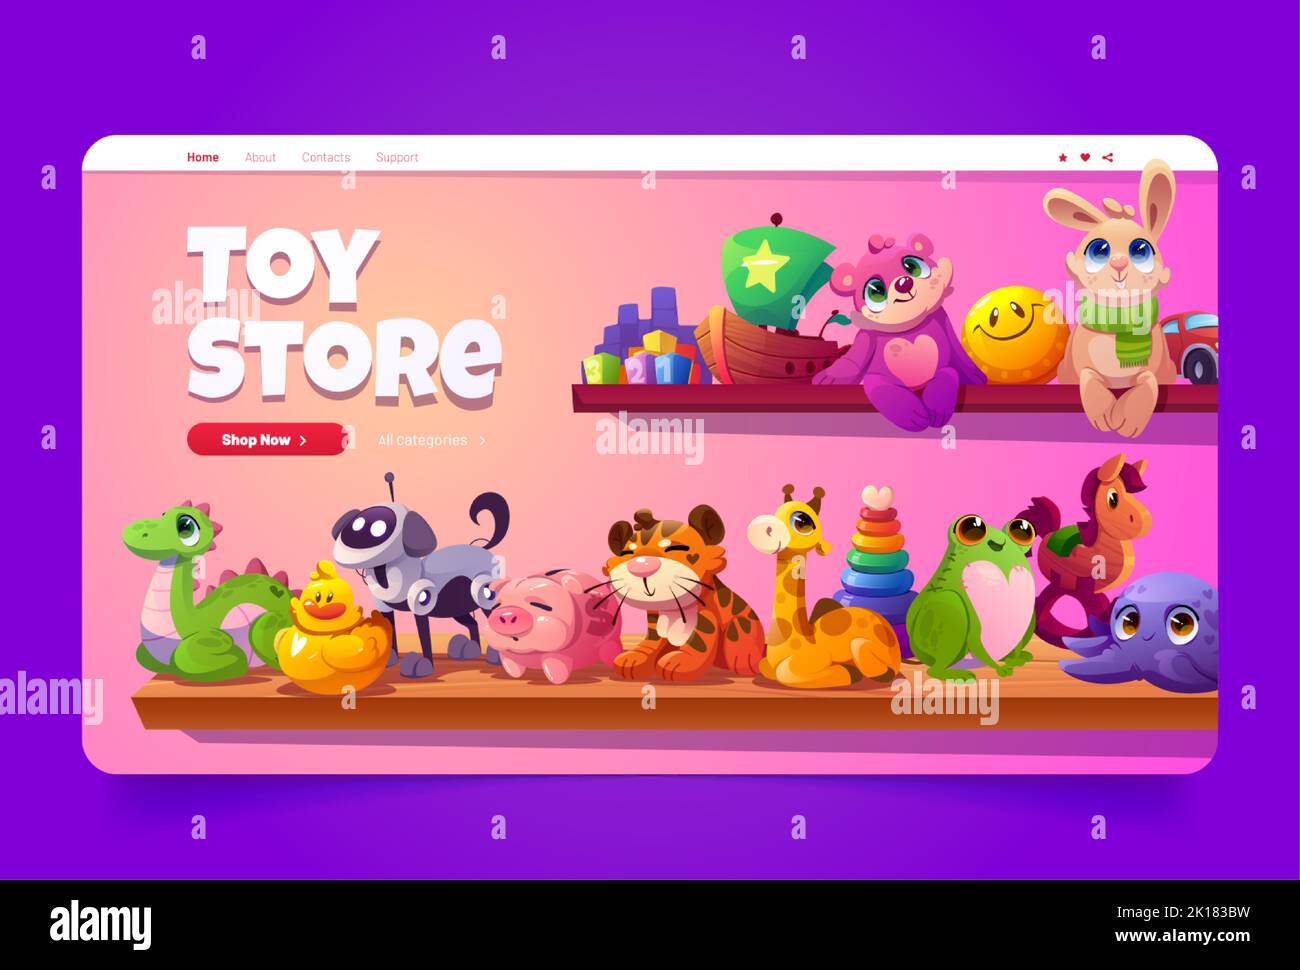 Toy store cartoon landing page with funny kids toys on wooden shelf in shop or market showcase, plush animals, piggy bank, smiling ball and robot dog Stock Vector